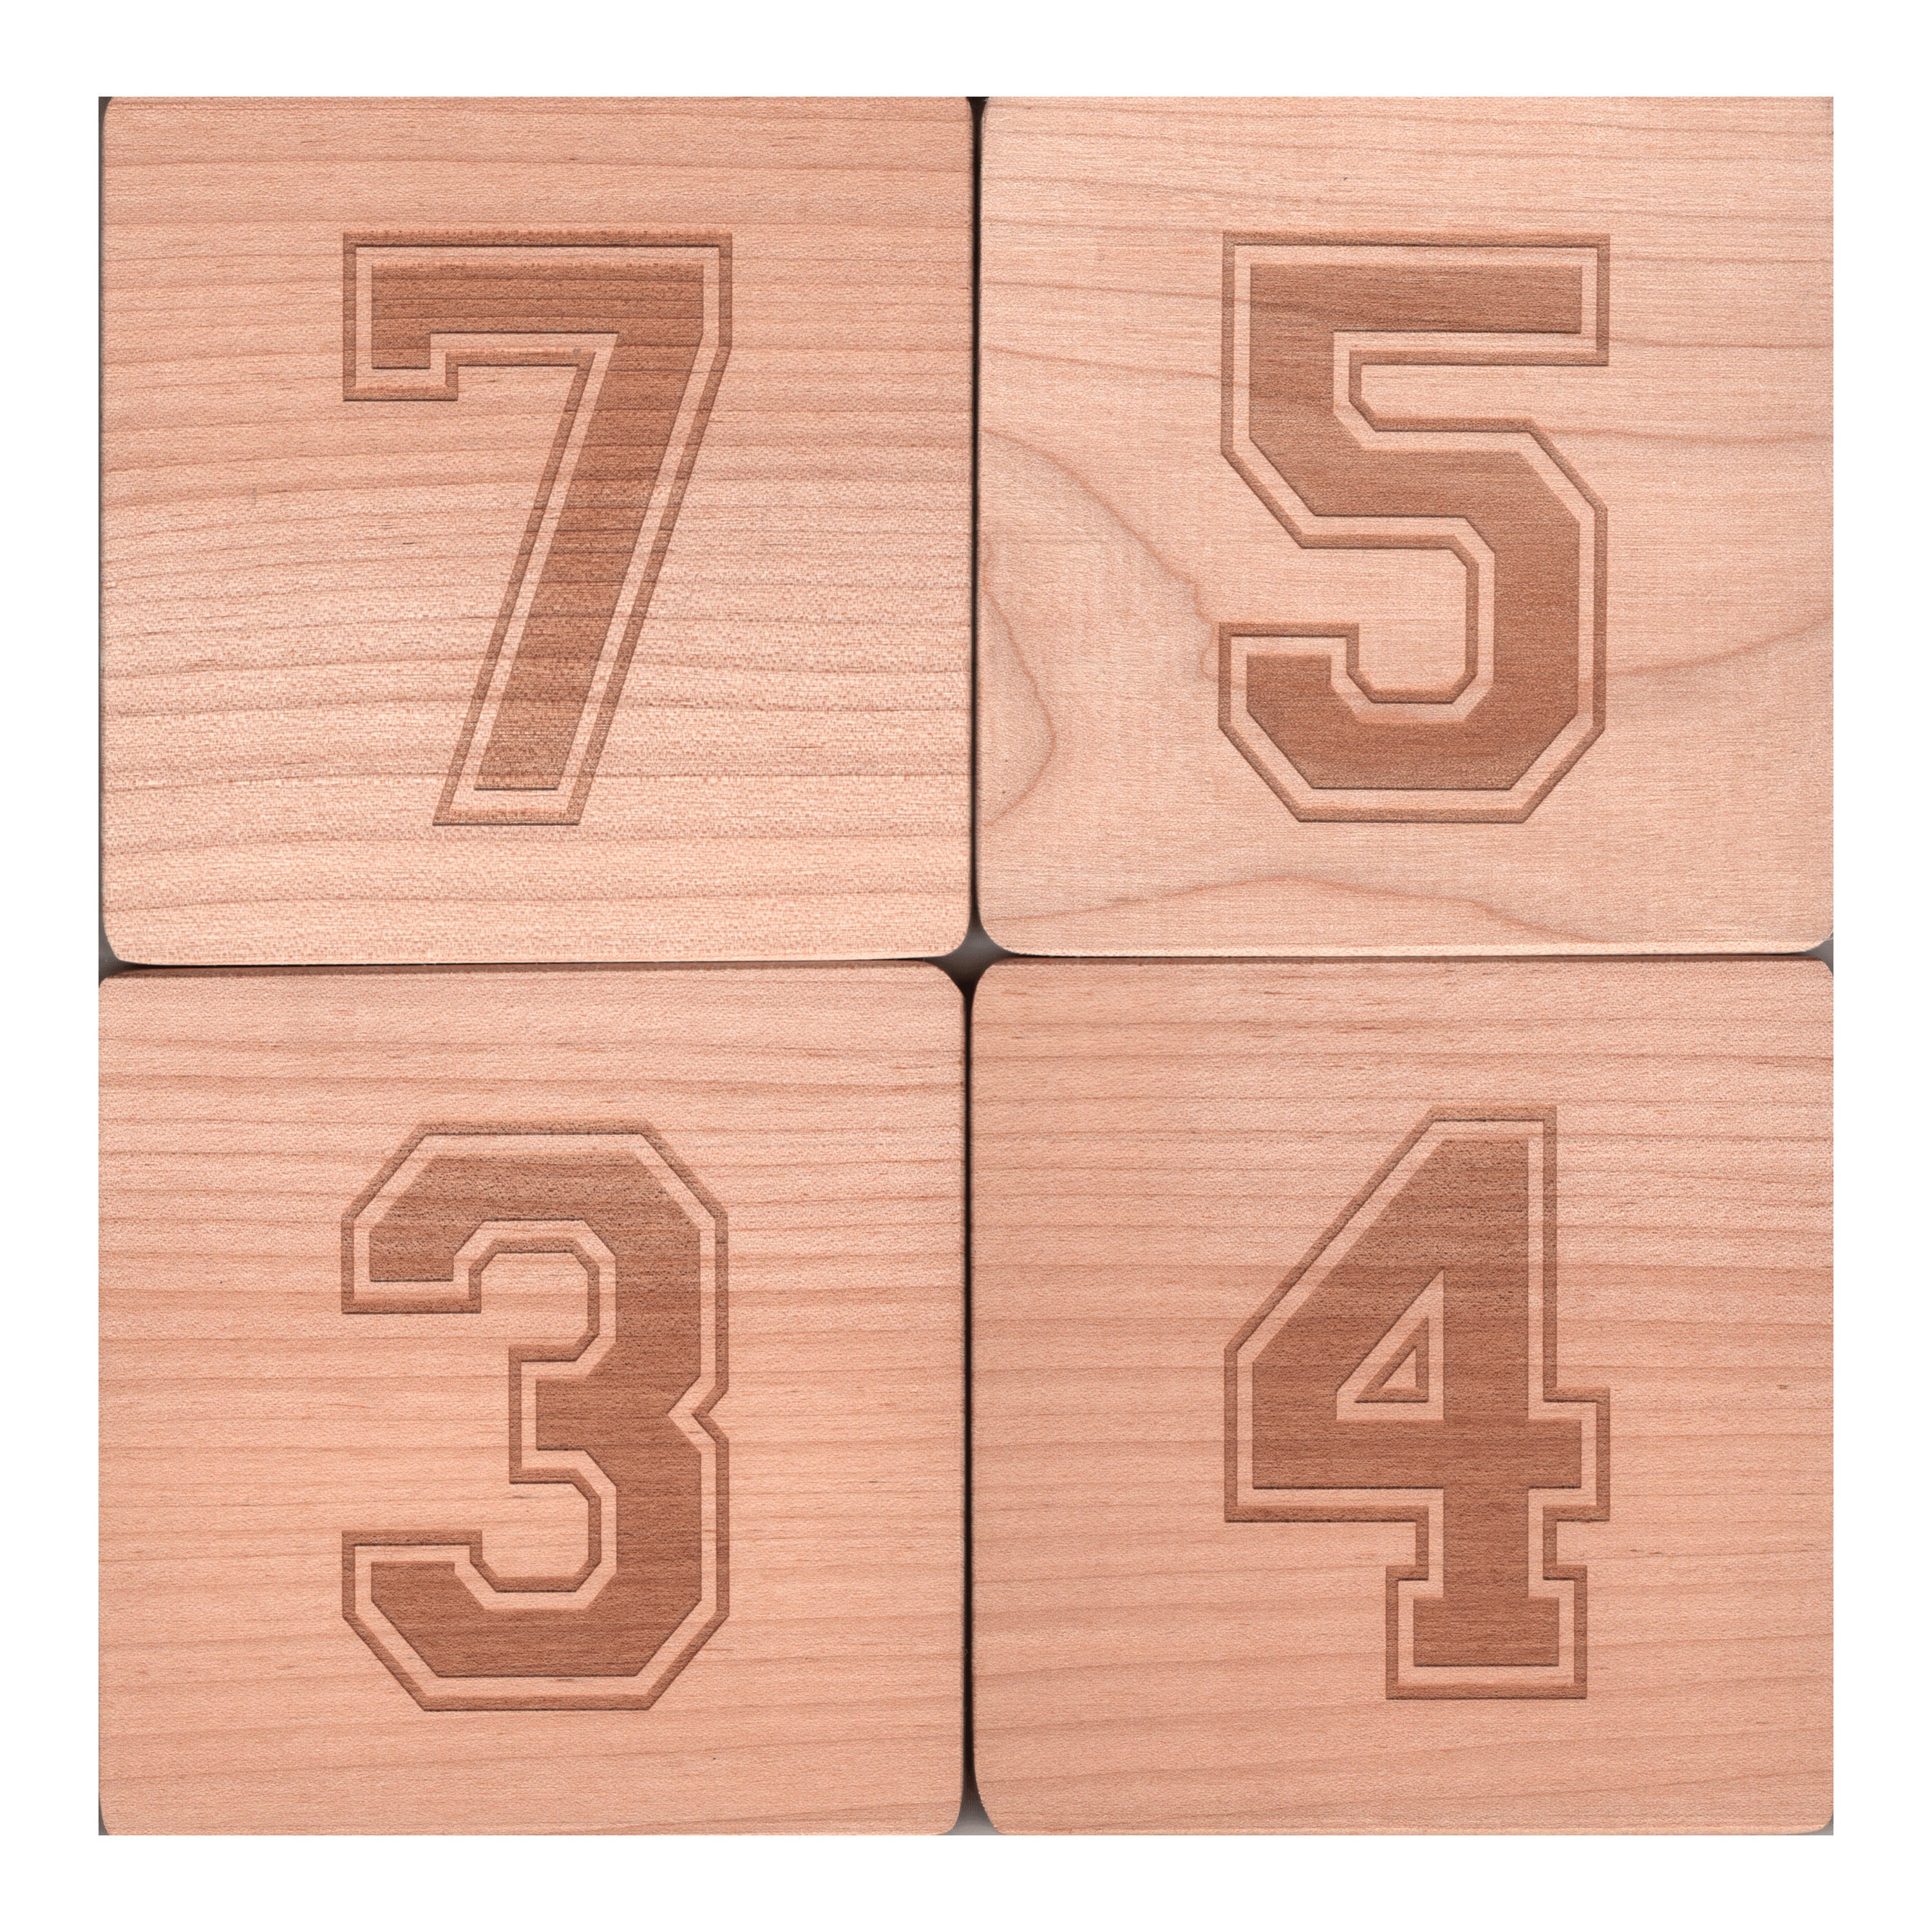 Yankees retired numbers Poster for Sale by gjnilespop